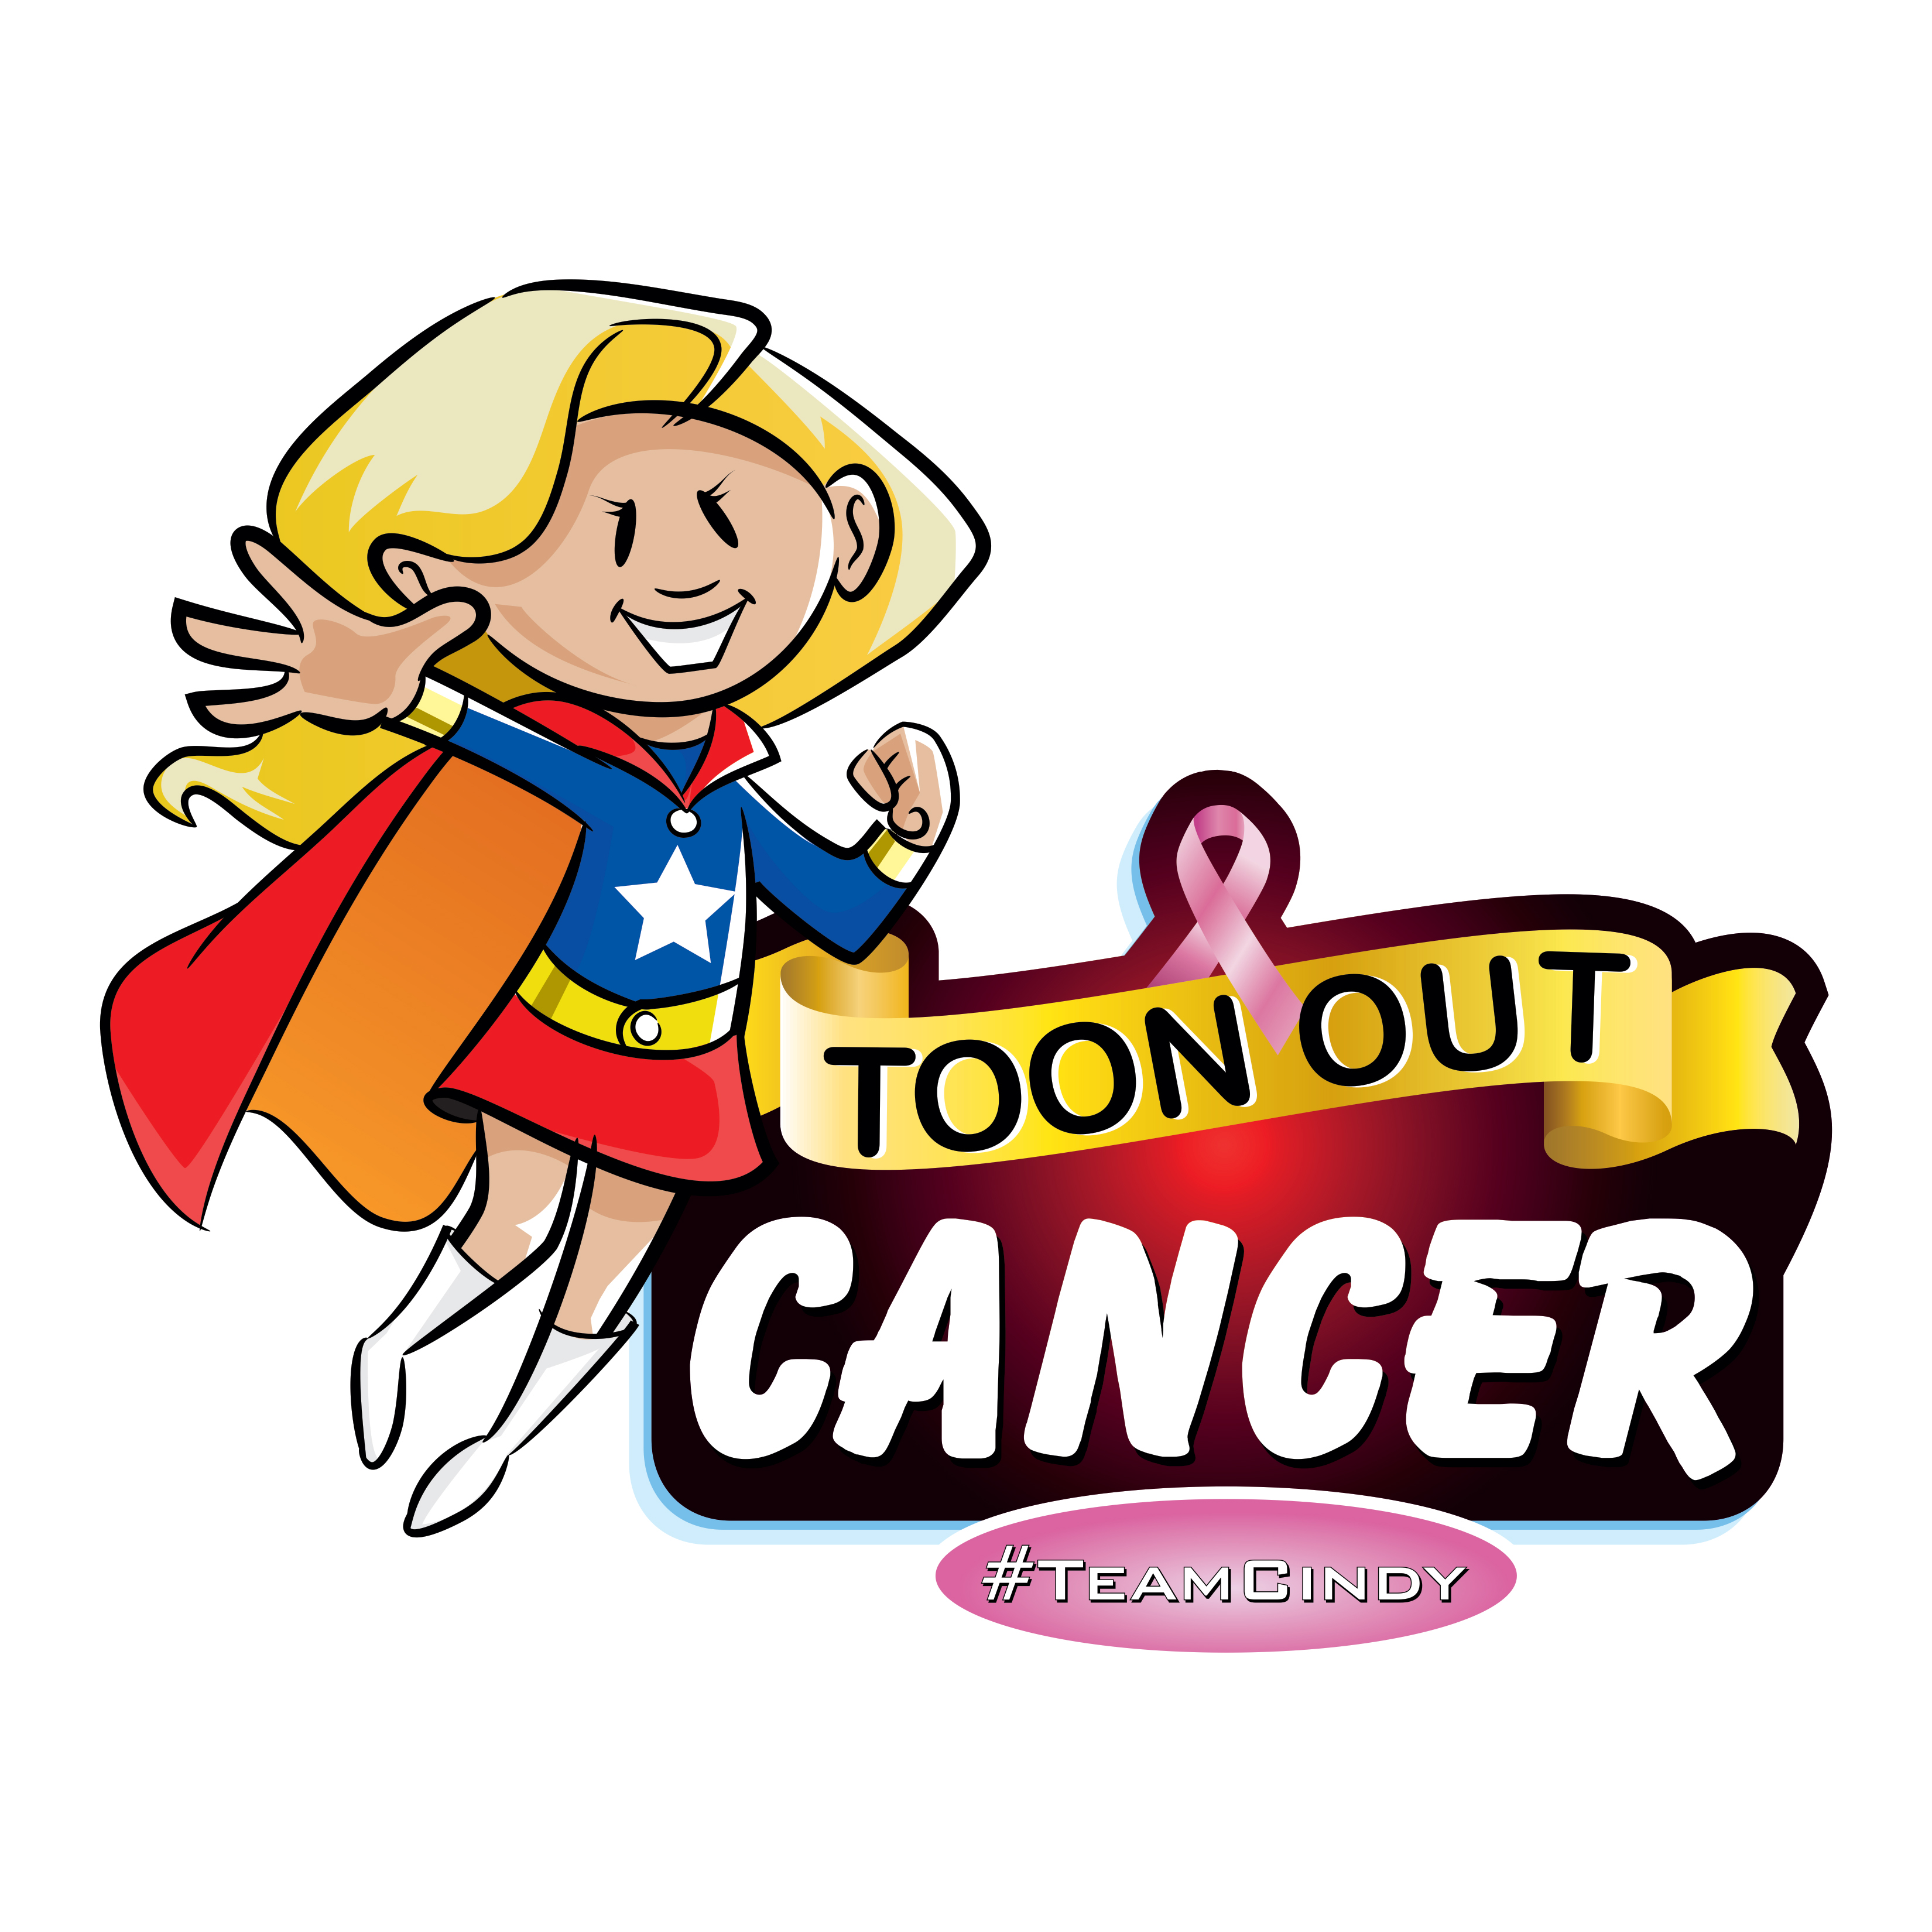 toon out cancer t-shirt design